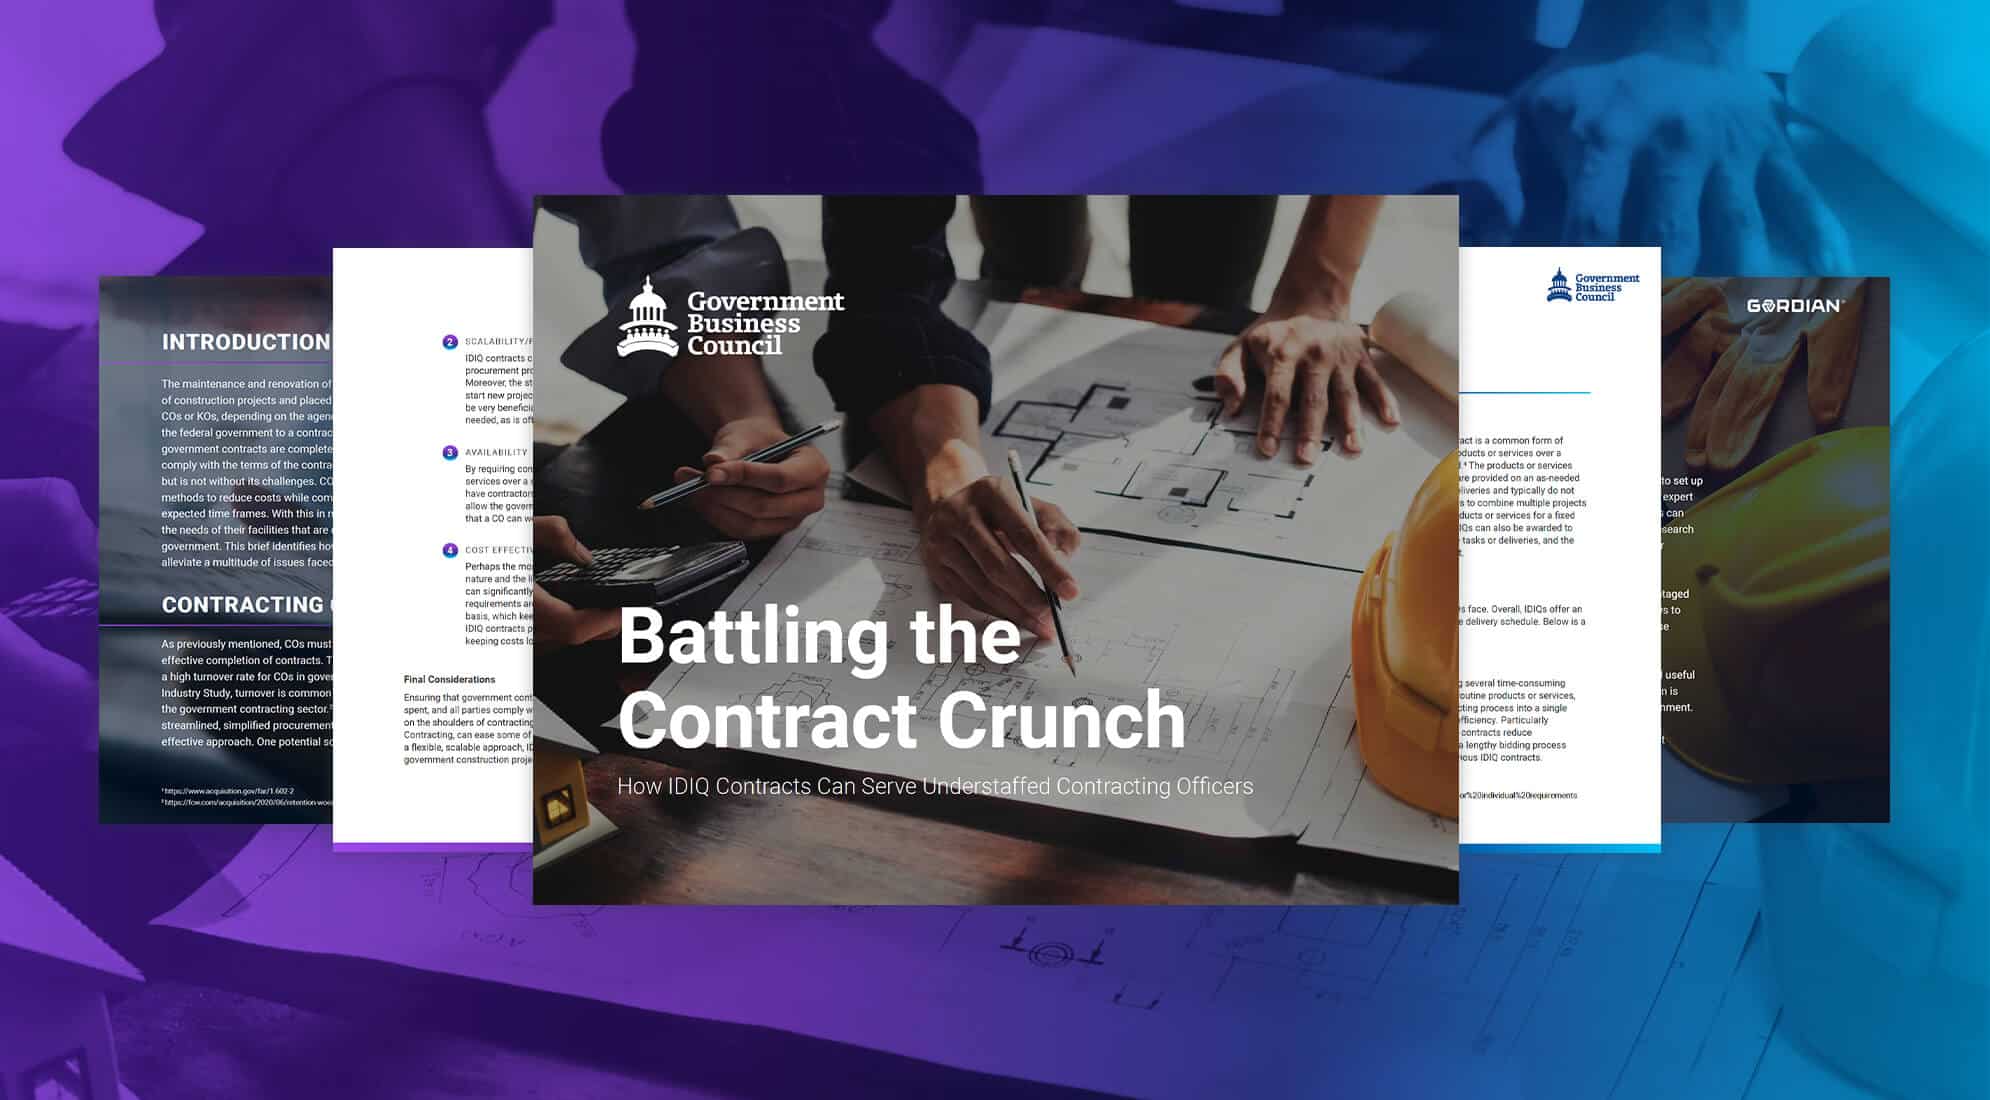 How IDIQ Contracts Can Serve Federal Contracting Offices 13